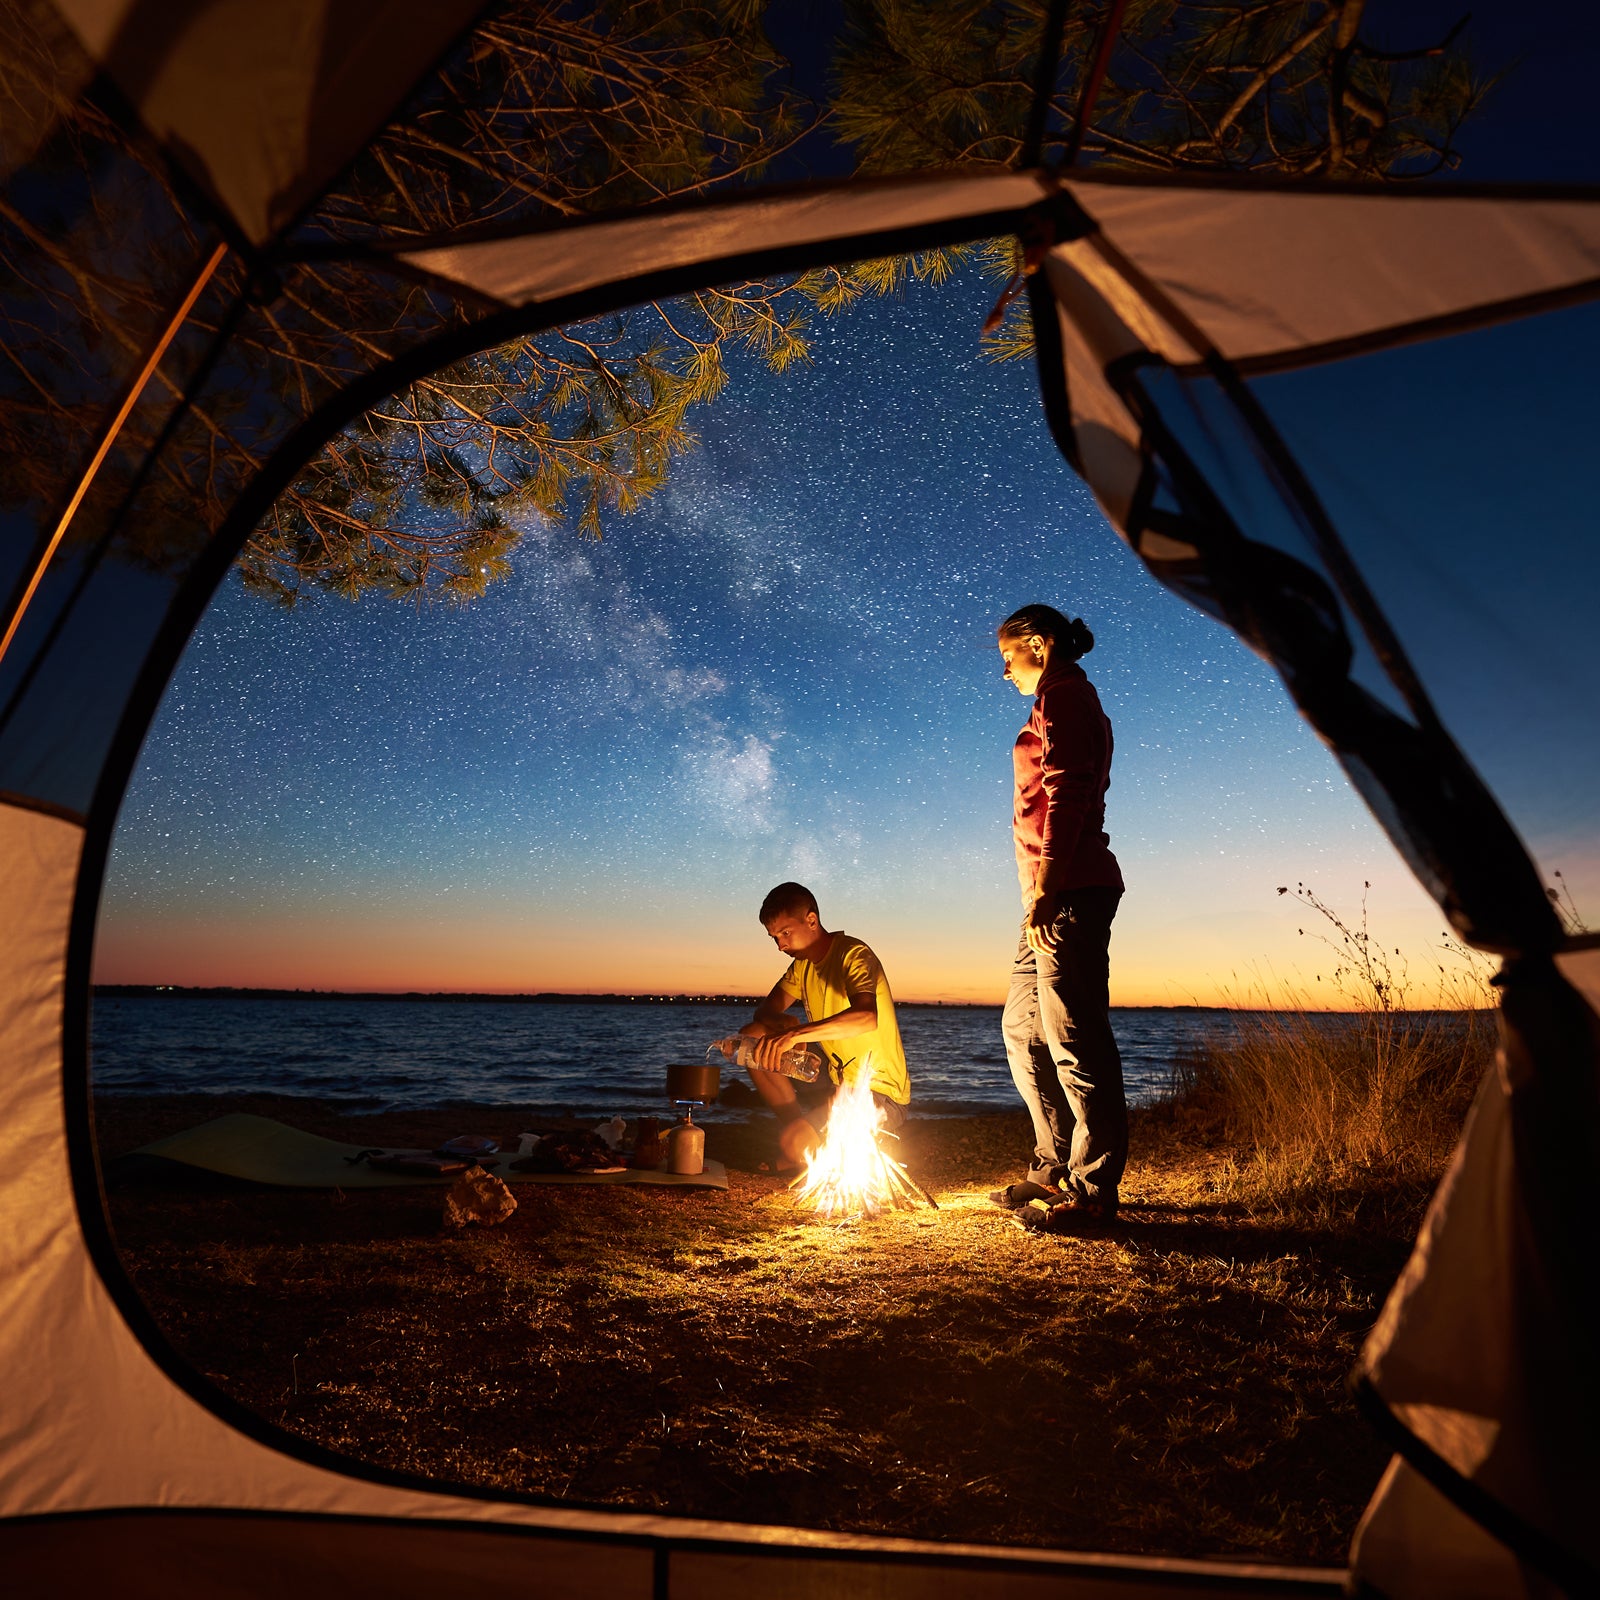 This holiday season, you can still pitch a tent on the beach or among red-rock deserts.